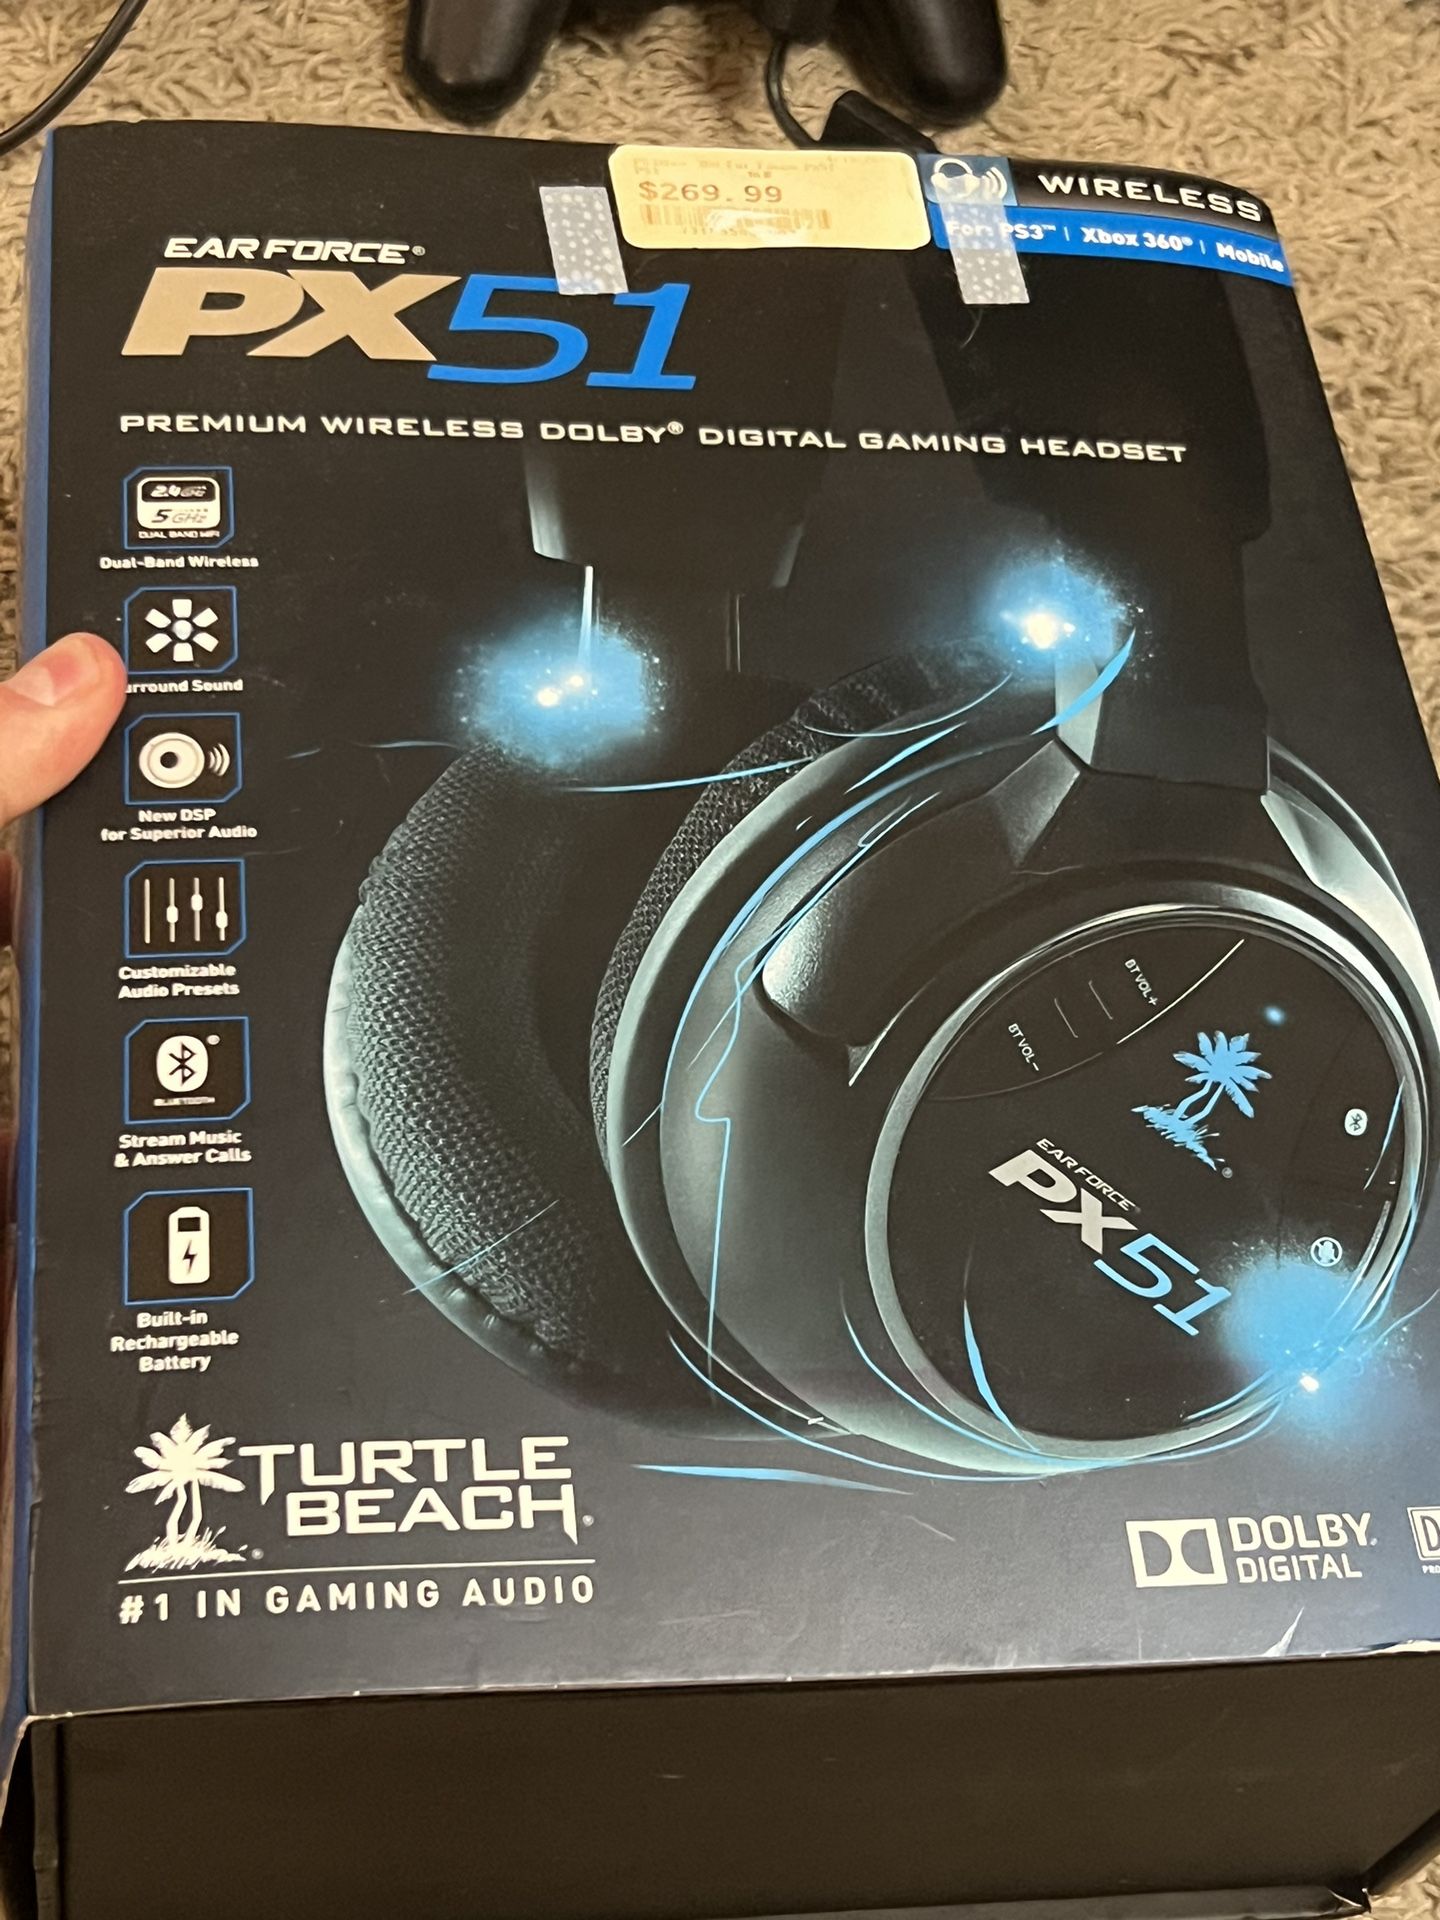 Turtle Beach PX 51 Earforce Gaming Headset Band New BEST OFFER!